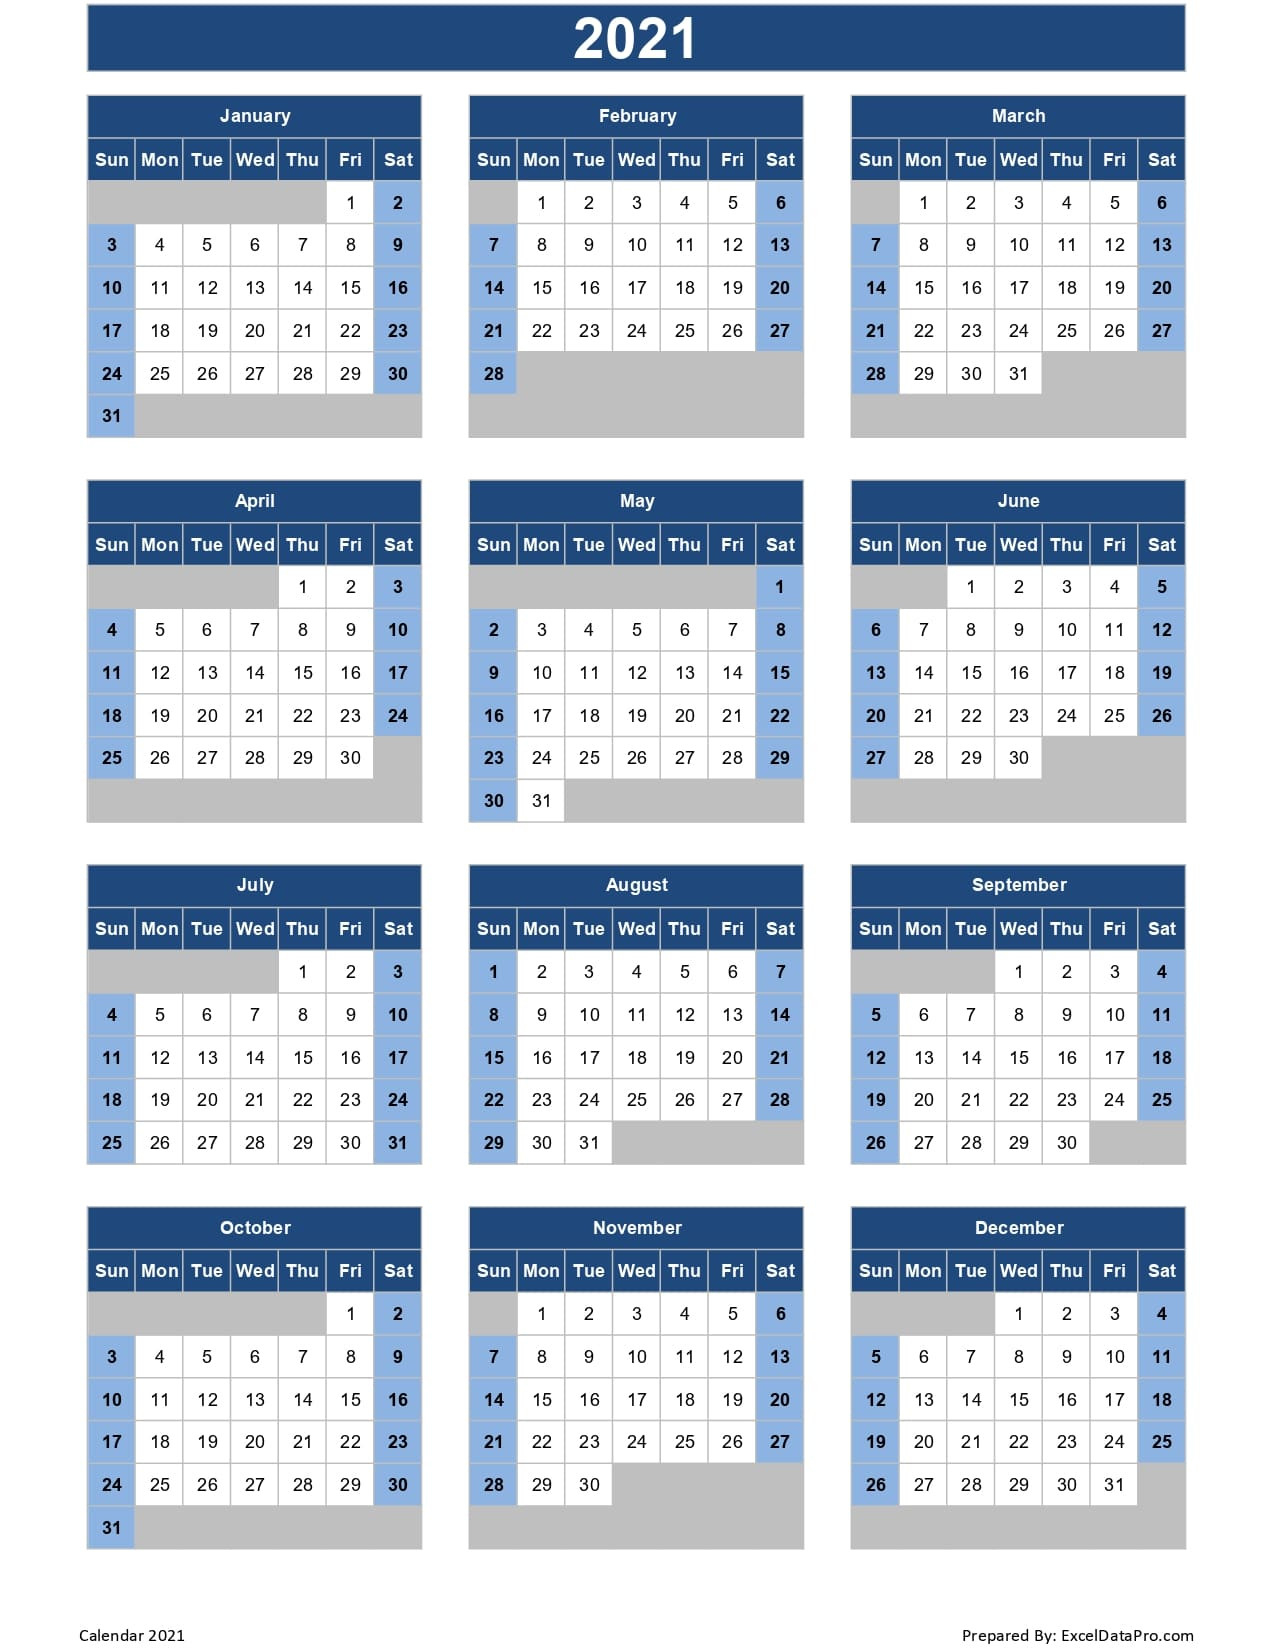 Download 2021 Yearly Calendar (Sun Start) Excel Template-Printable Calendar 2021 Large Font